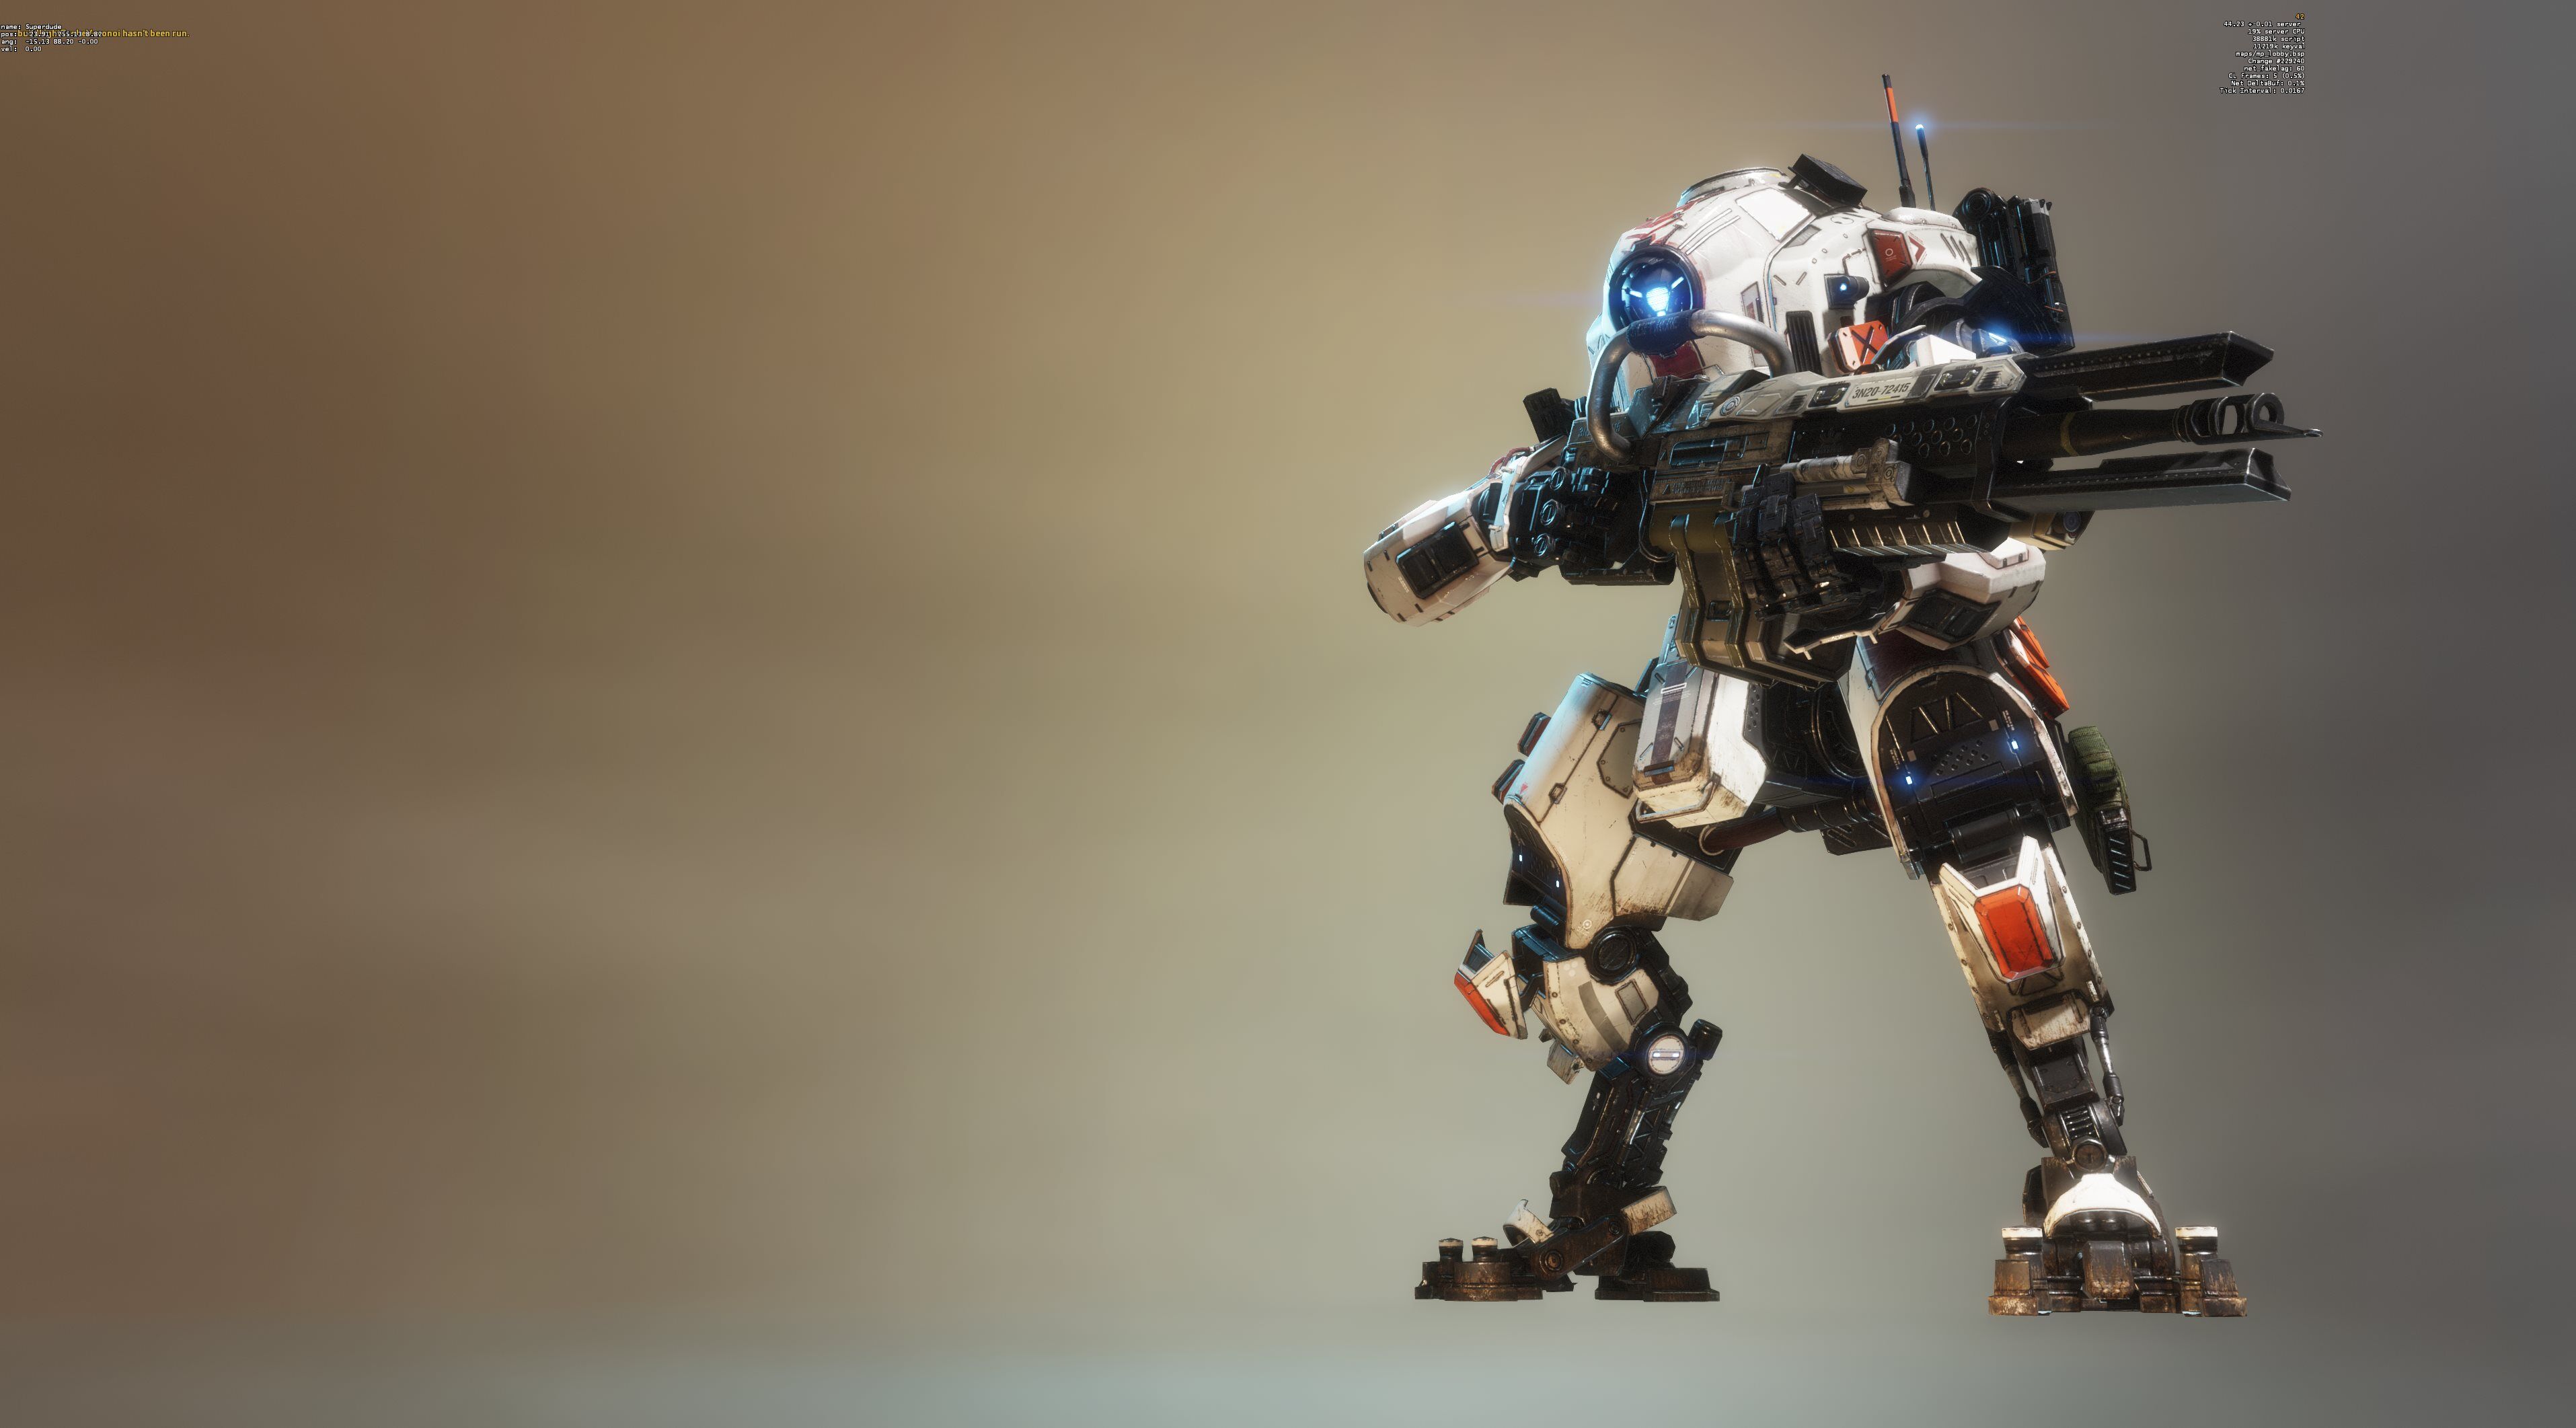 Titanfall 2 Cross-Play Is Unlikely but Not Impossible, Says Director